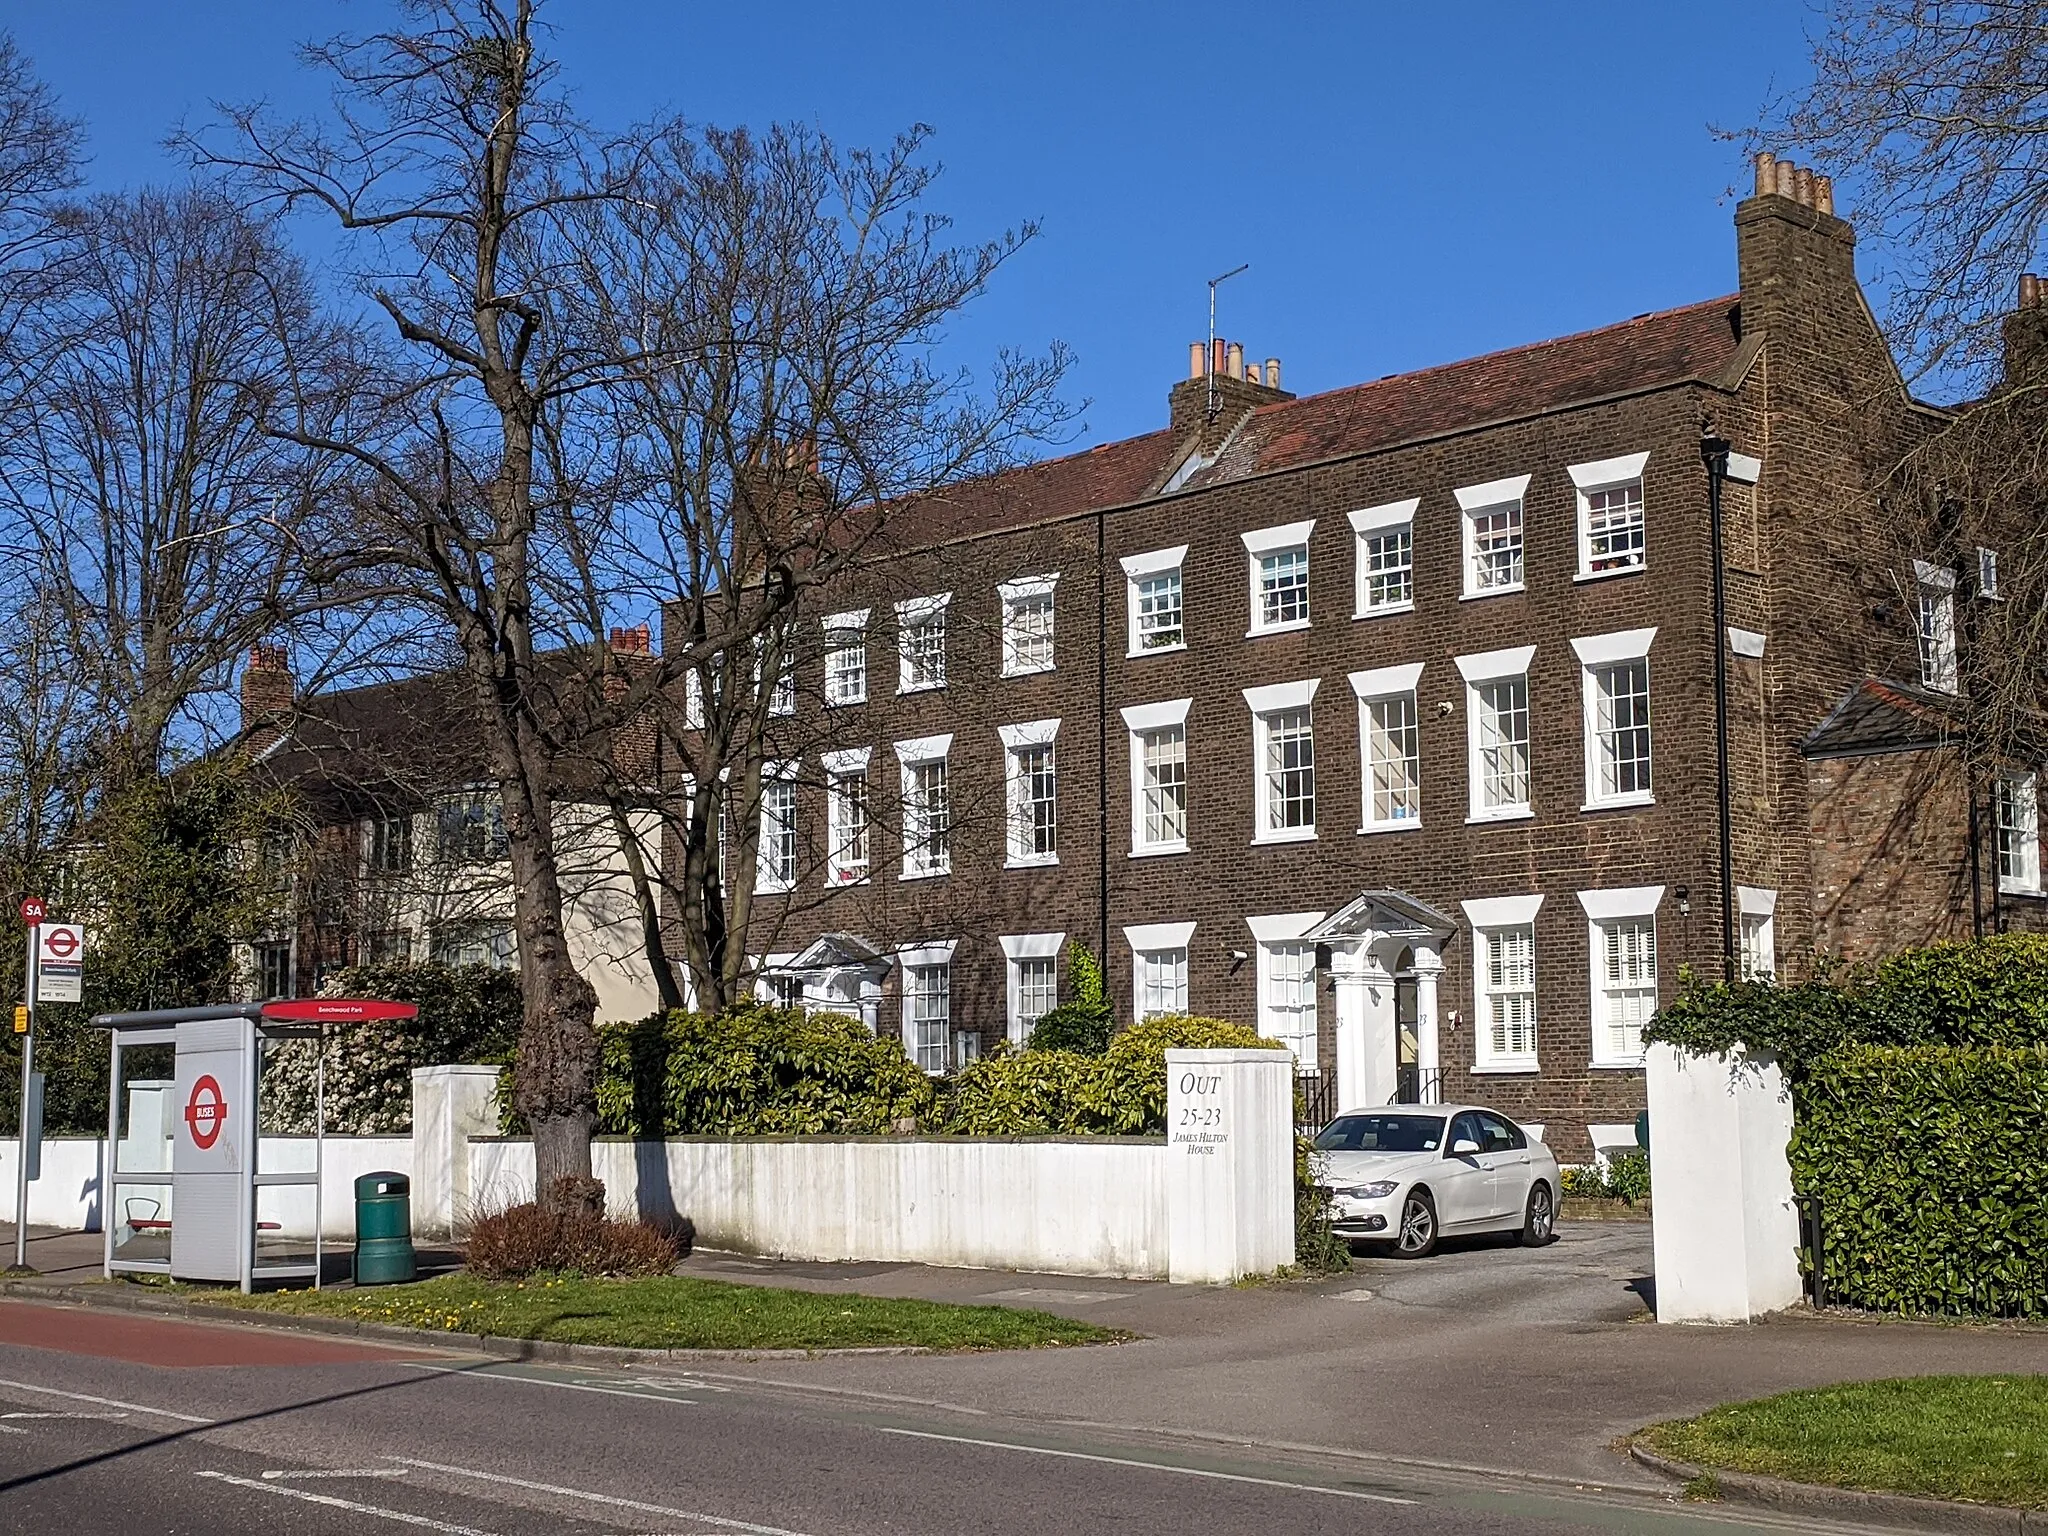 Photo showing: 23-25 Woodford Road. A Grade II listed building